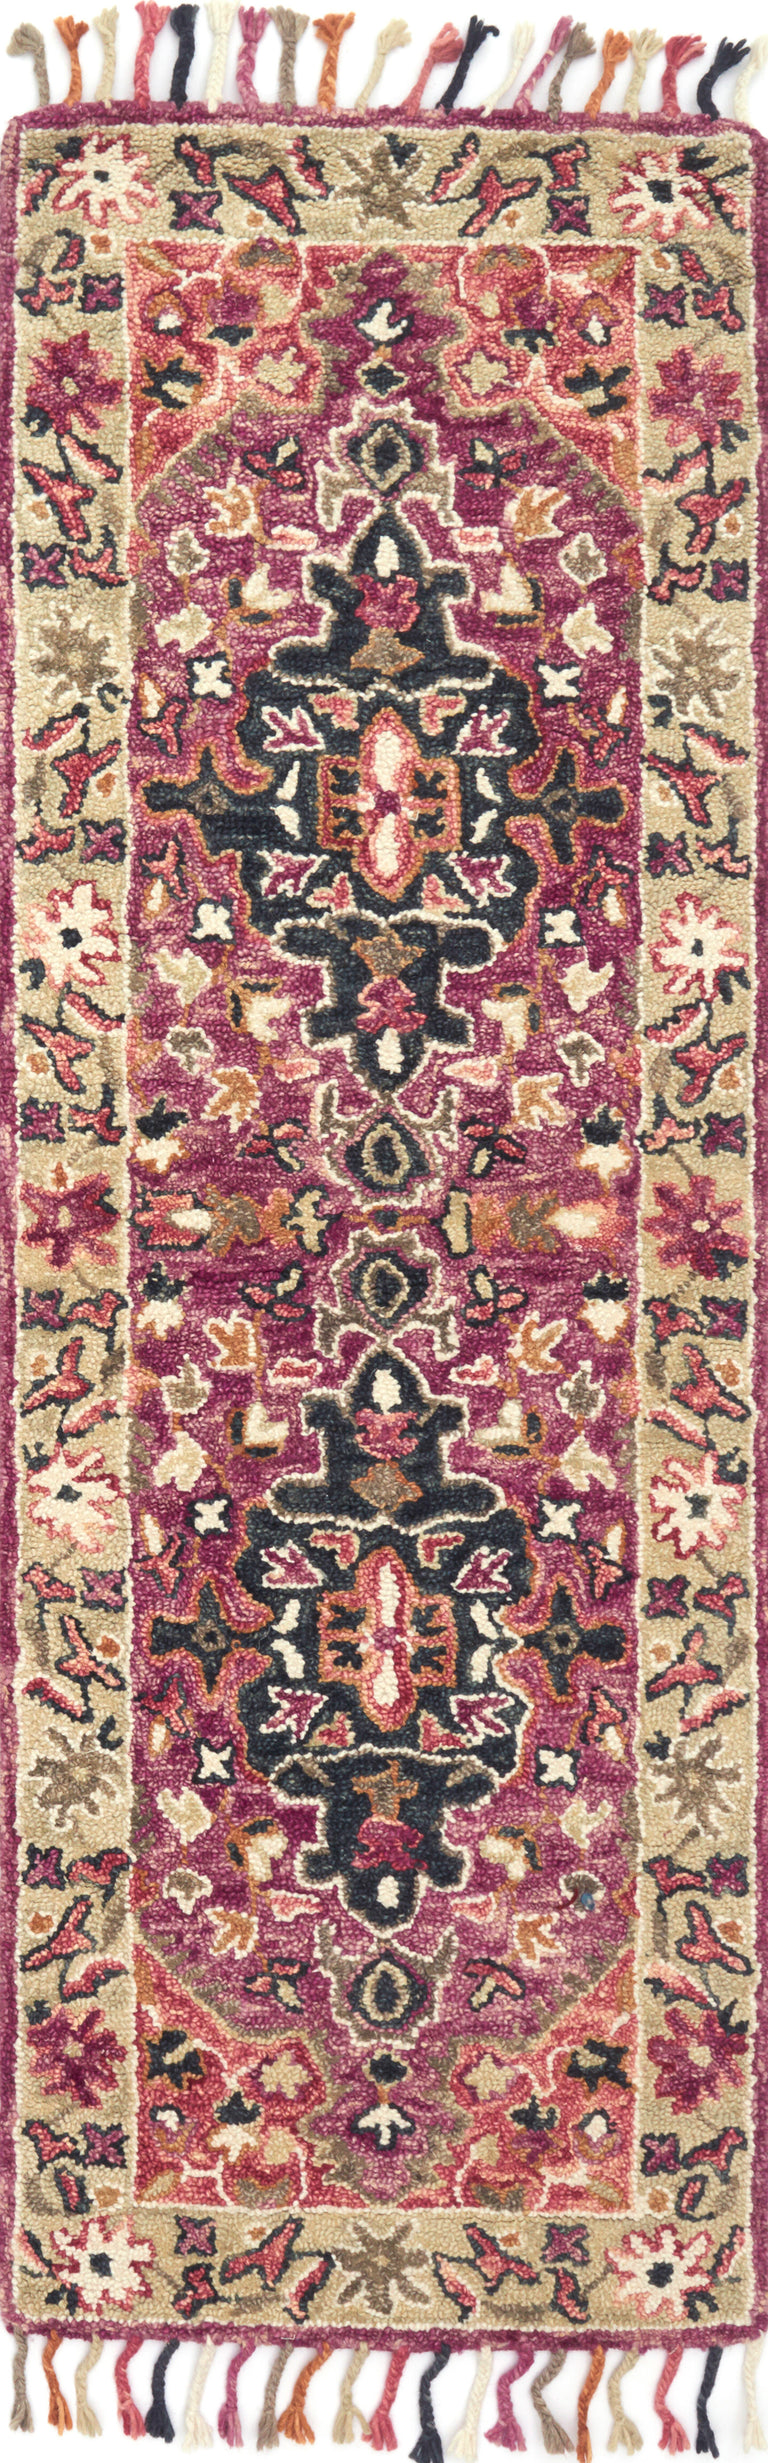 Loloi Rugs Zharah Collection Rug in Raspberry, Taupe - 7'9" x 9'9"